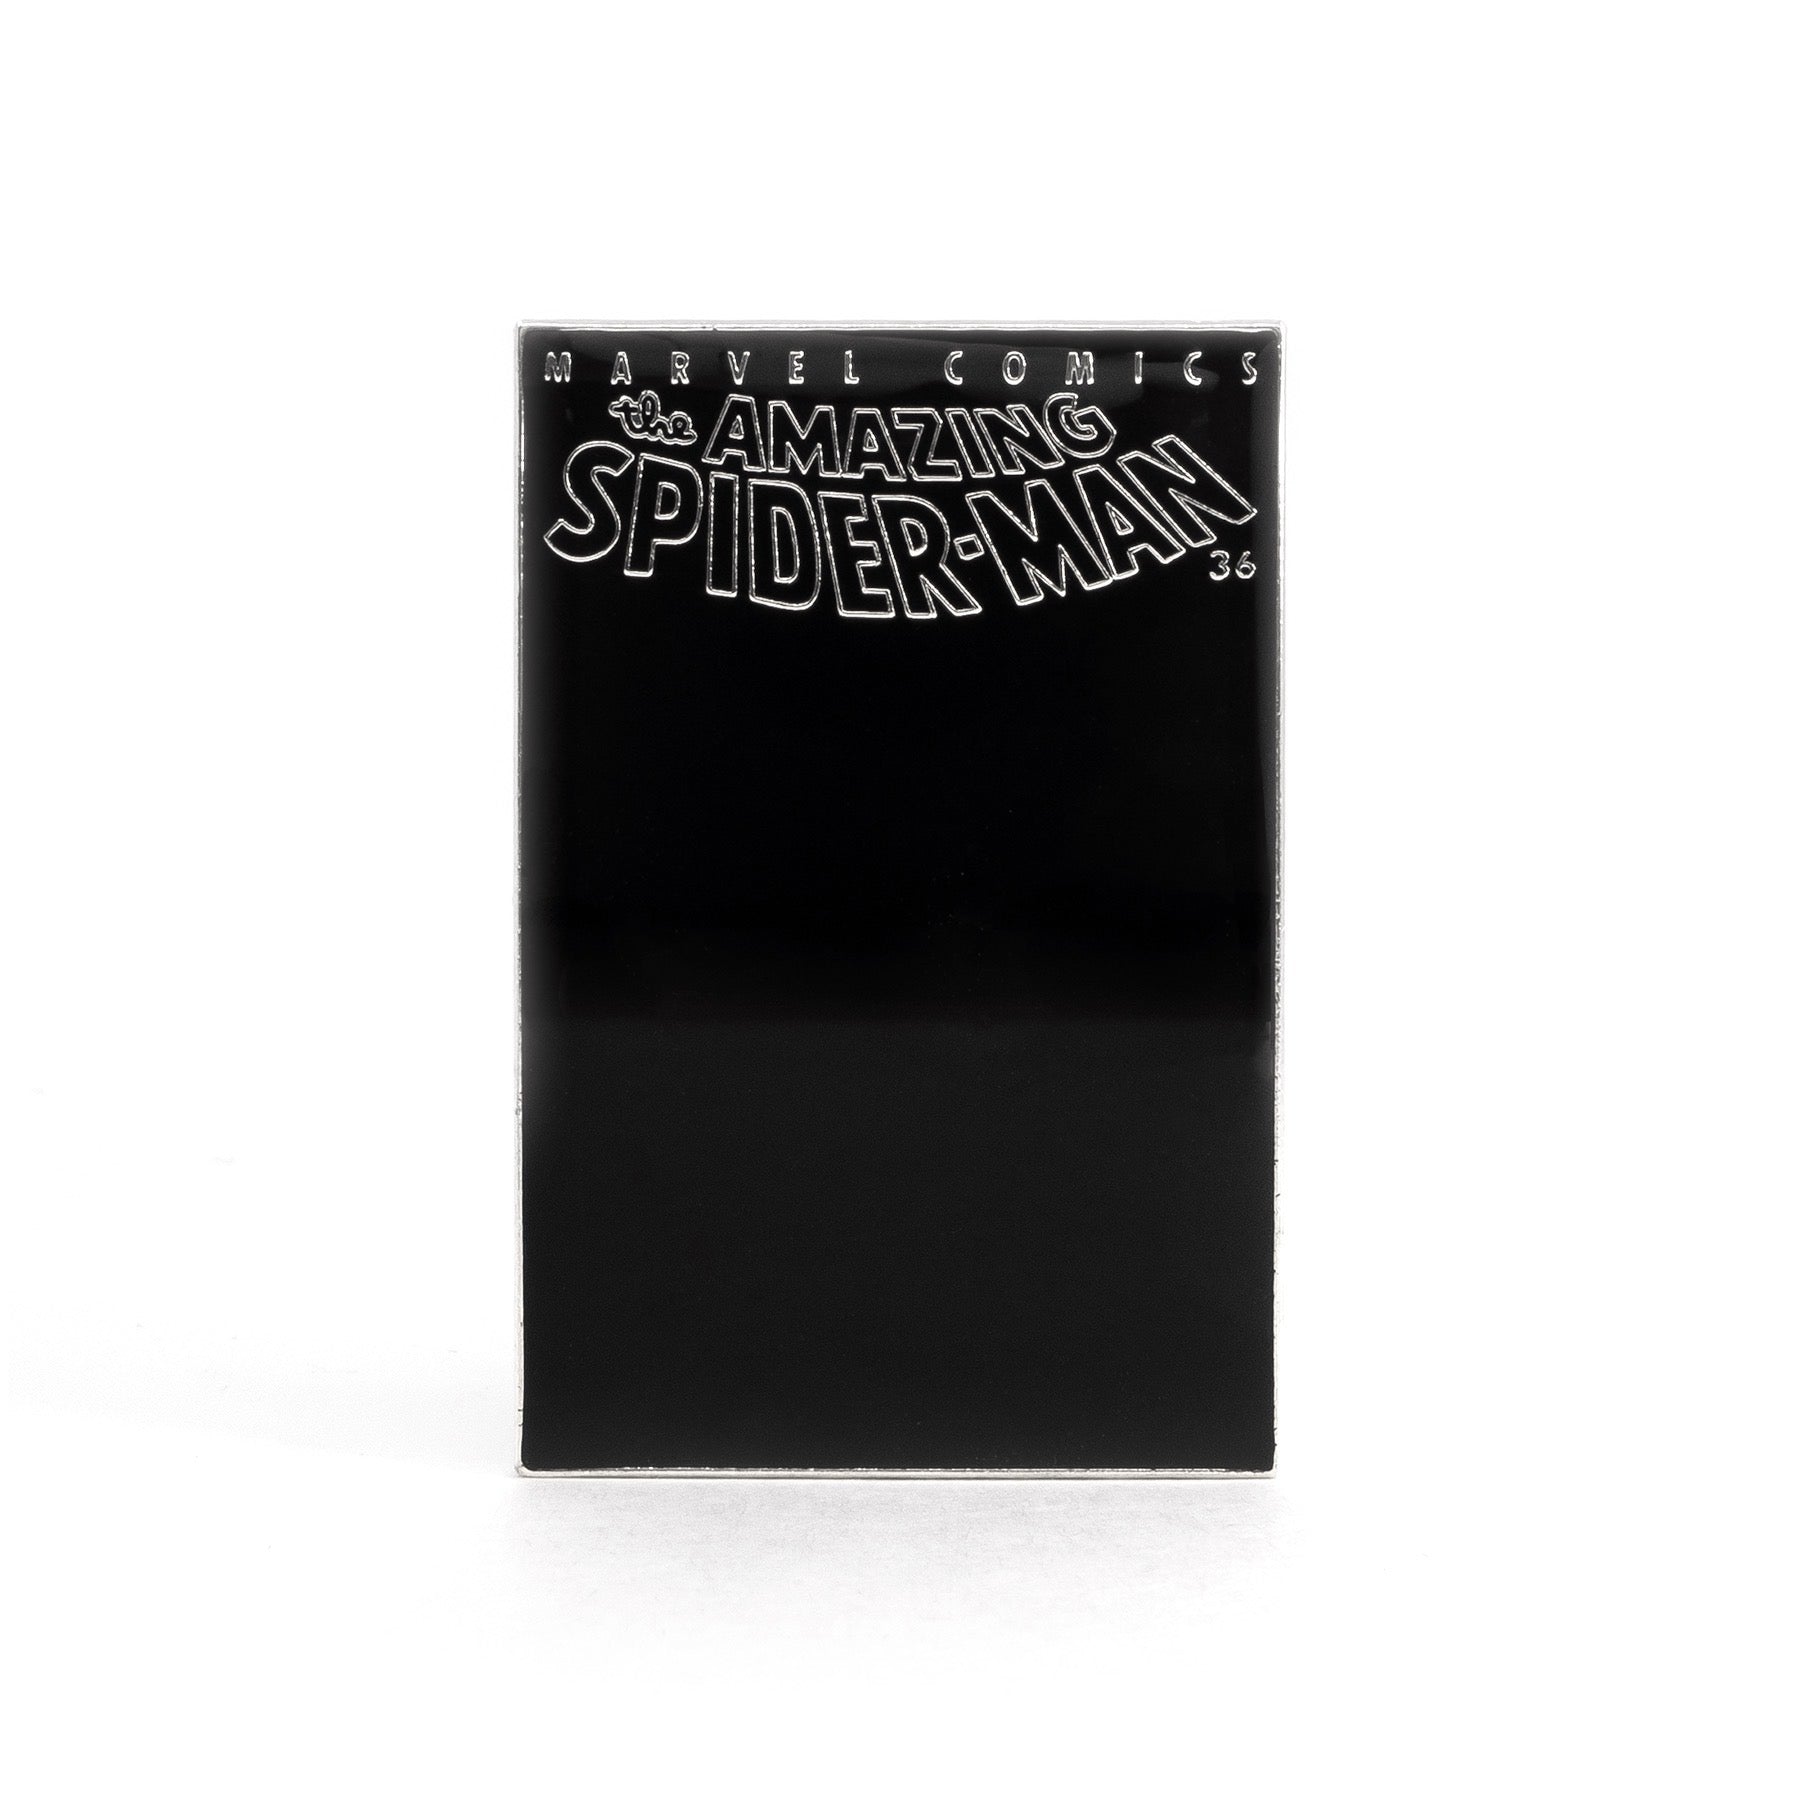 Issue #36 (The Black Issue) enamel pin